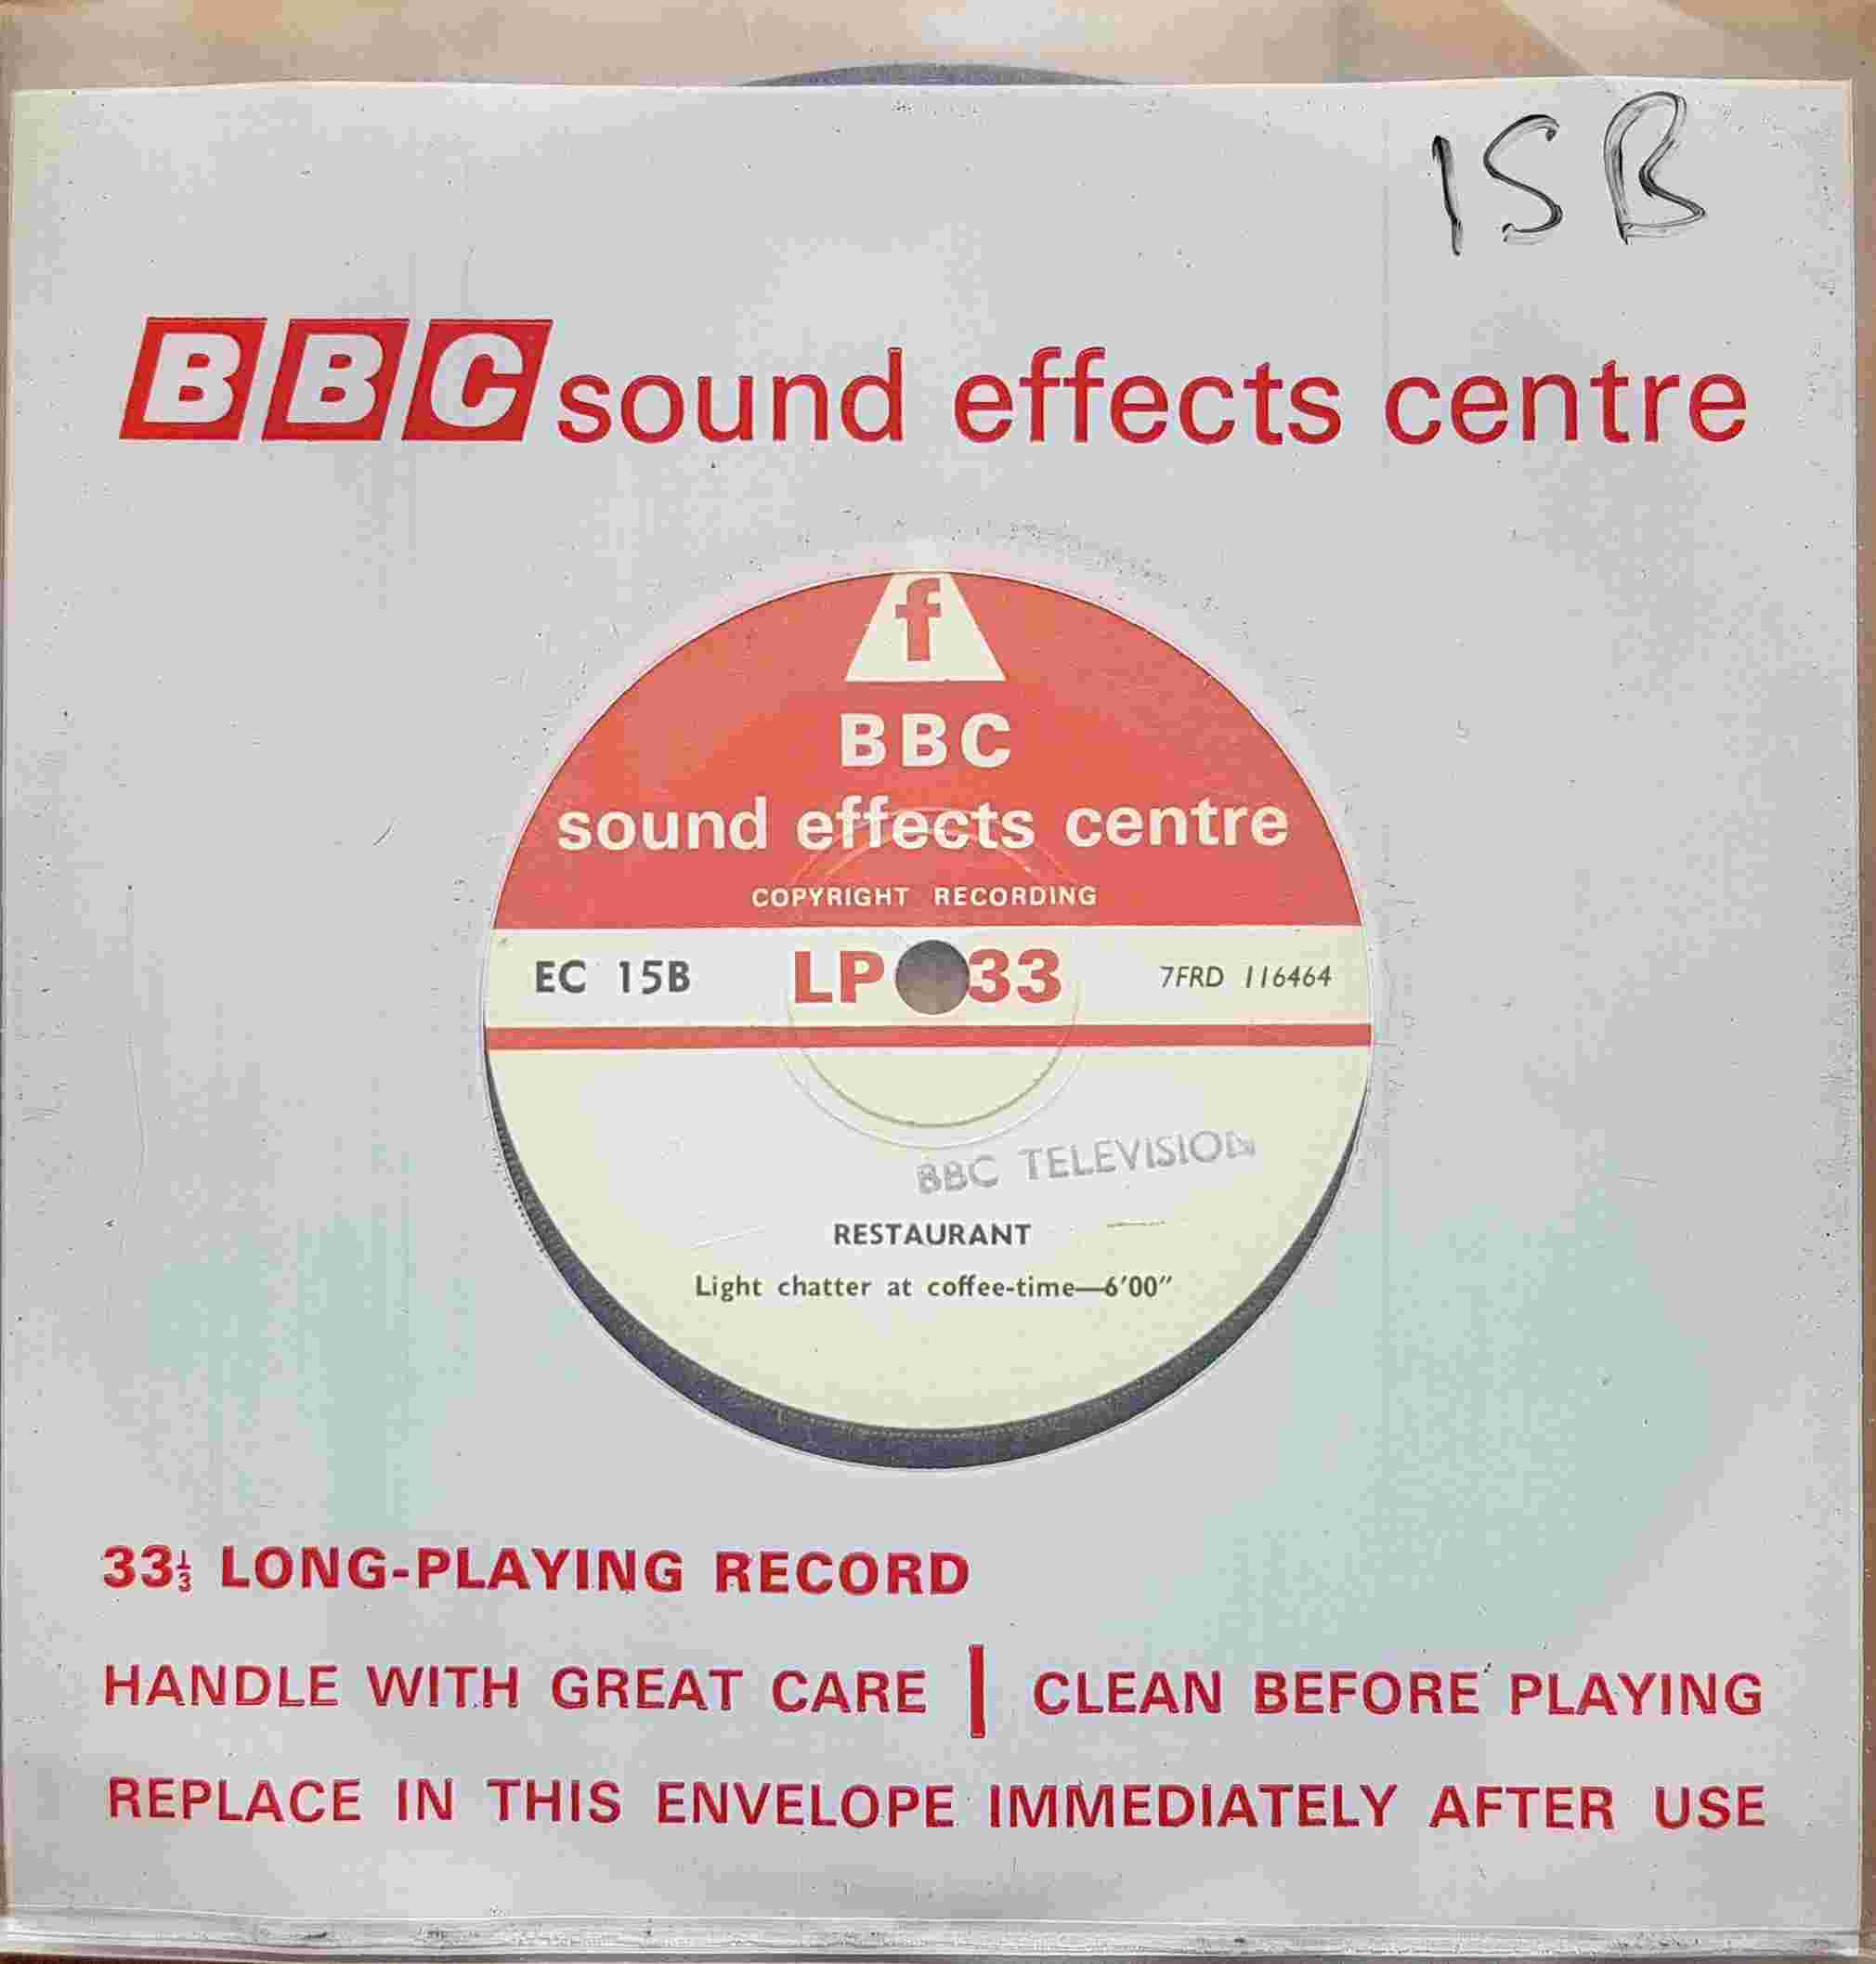 Picture of EC 15B Restaurant by artist Not registered from the BBC records and Tapes library